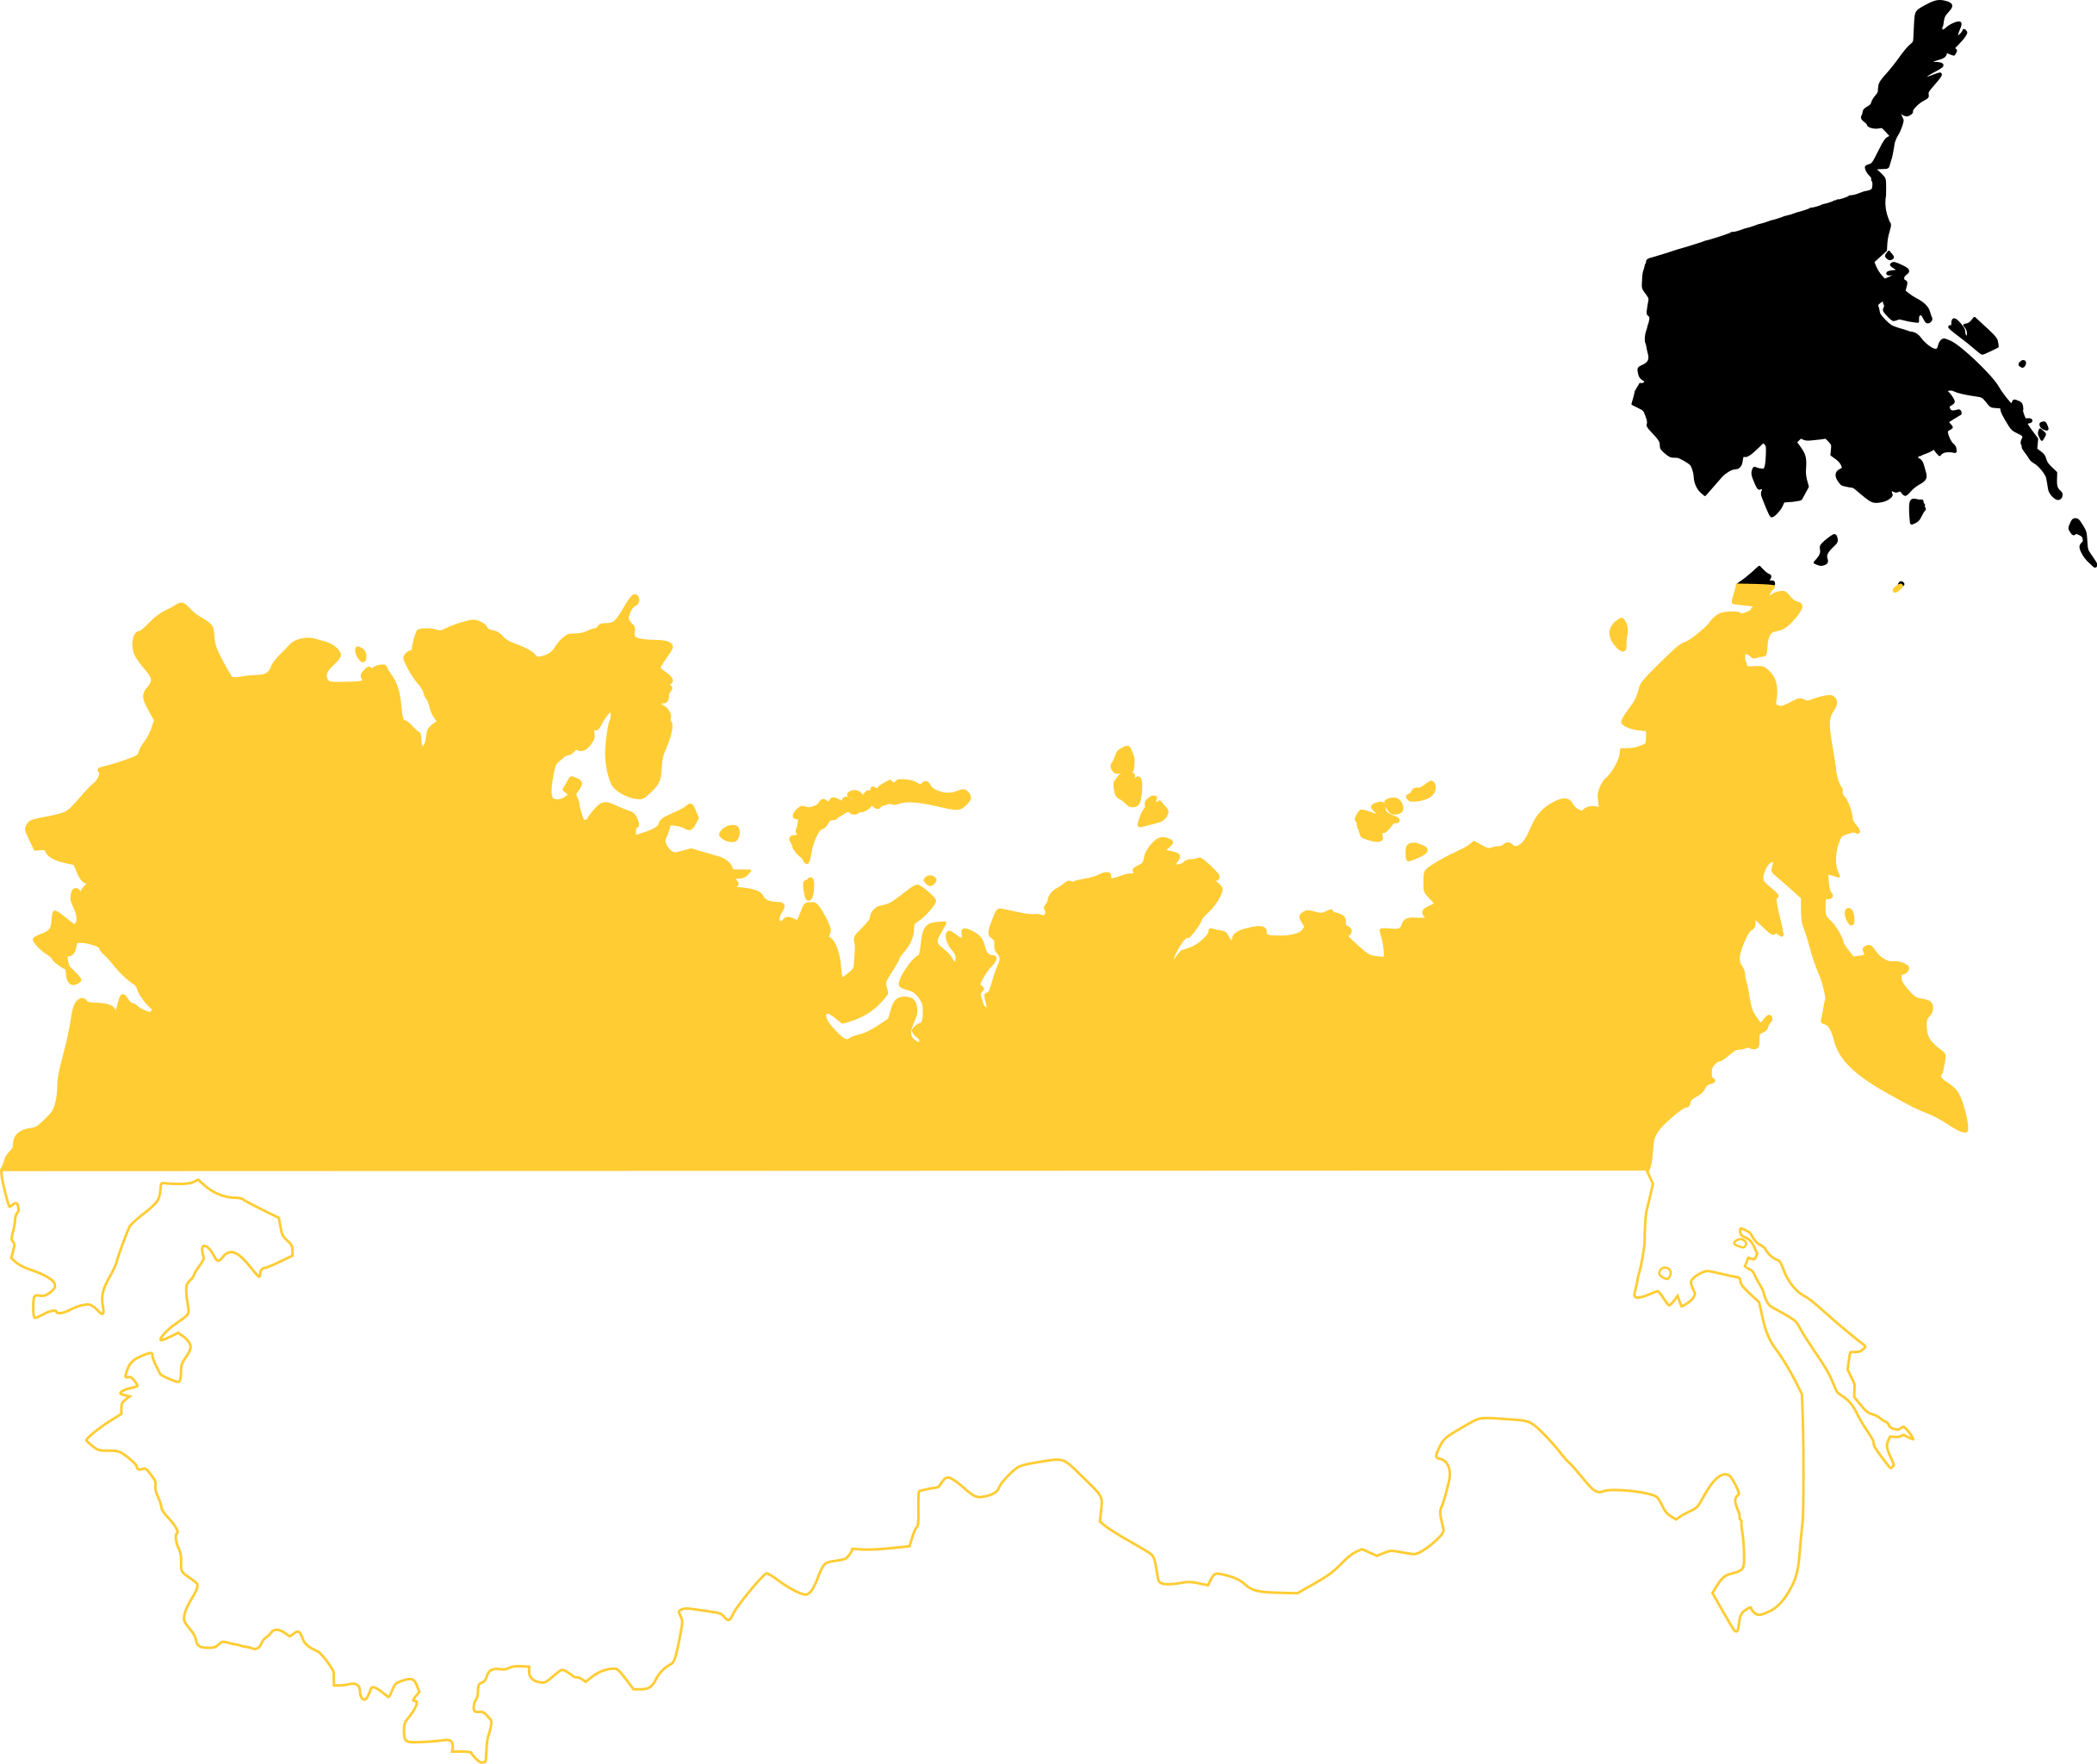 https://upload.wikimedia.org/wikipedia/commons/thumb/1/10/Flag-map_of_the_Russian_Empire_%281866%29.svg/2435px-Flag-map_of_the_Russian_Empire_%281866%29.svg.png